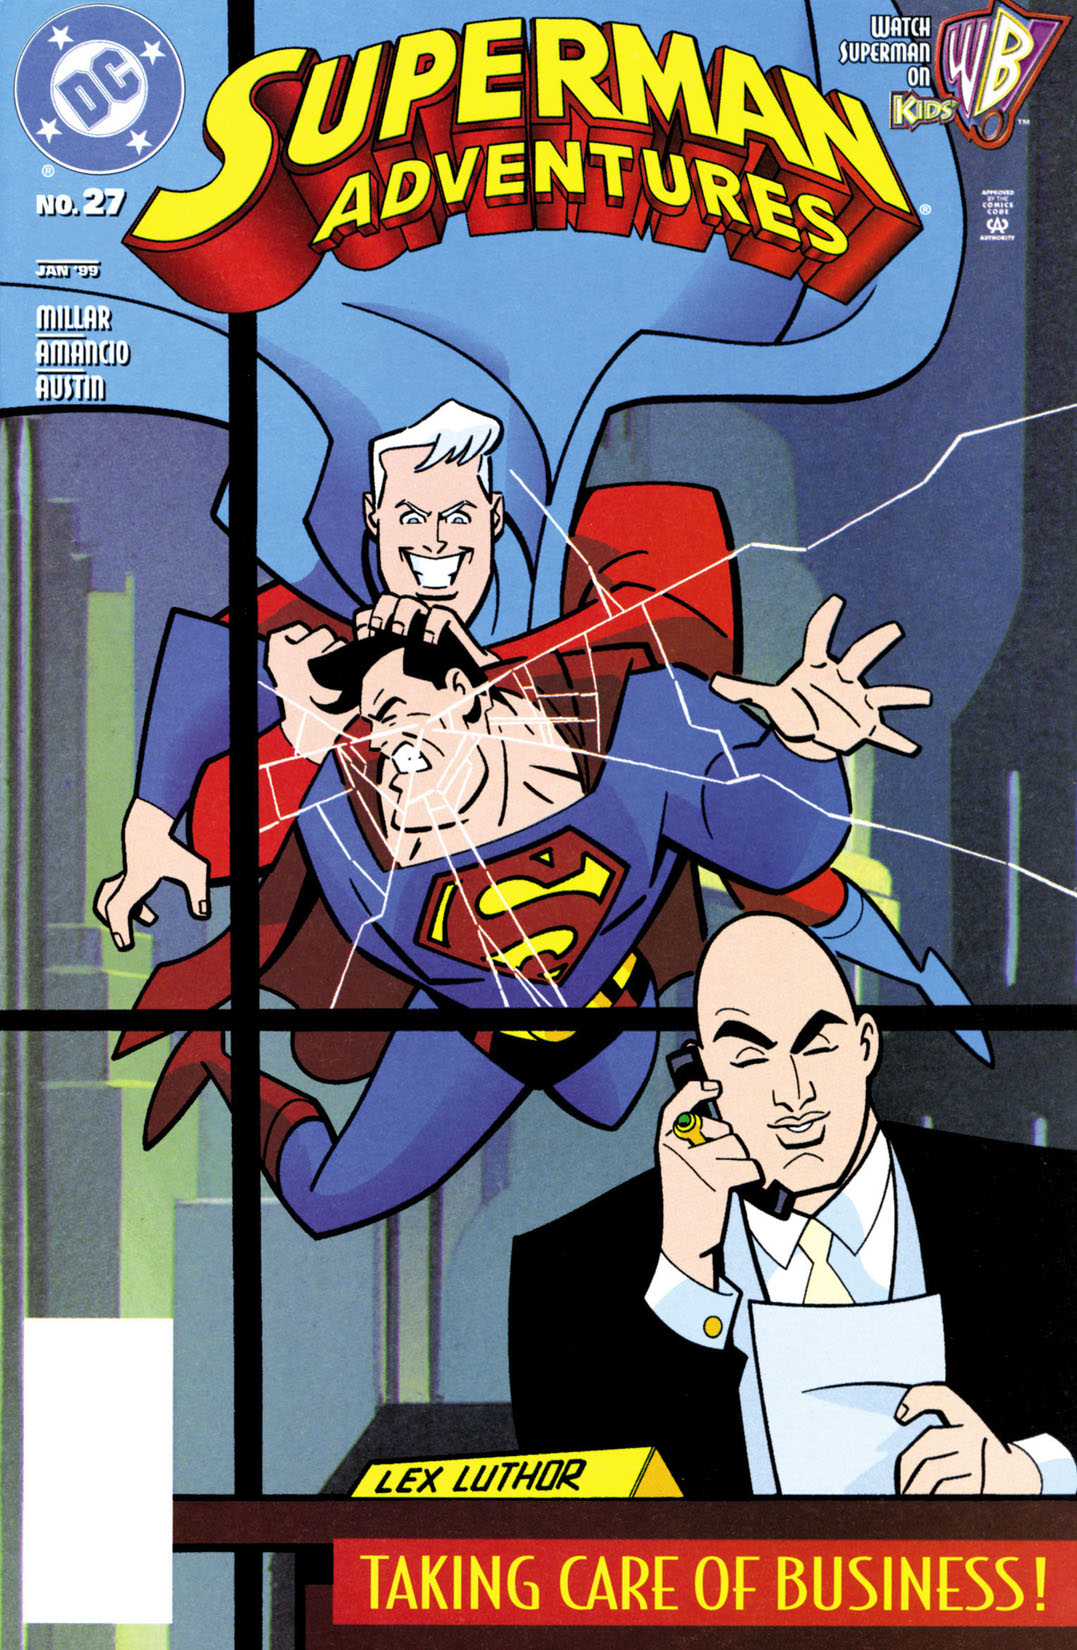 Superman Adventures #27 preview images